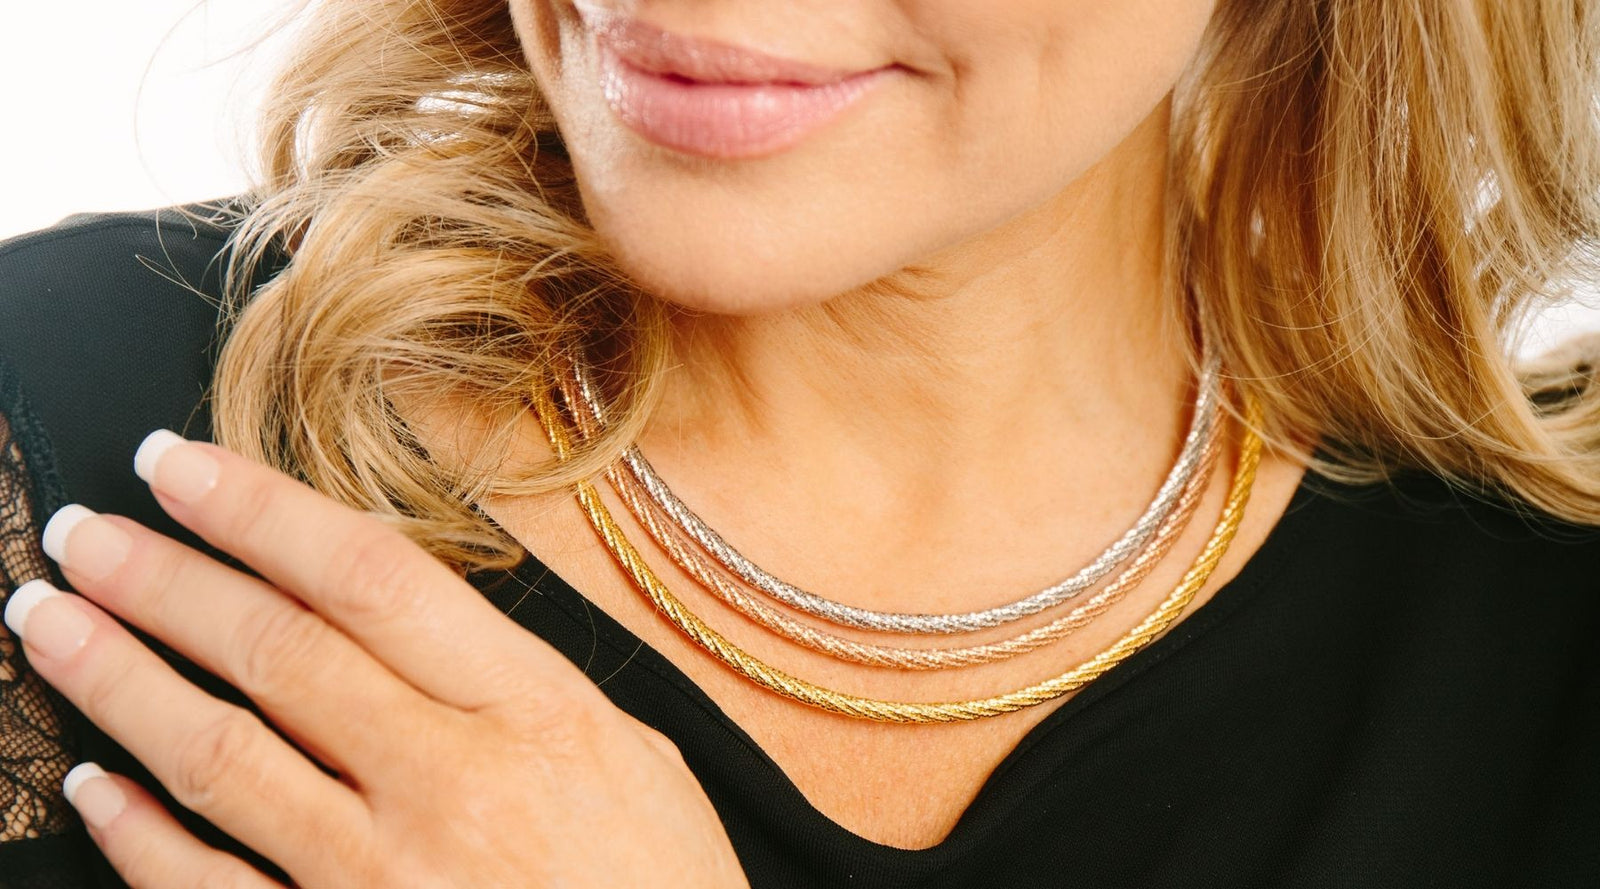 7 Common Jewelry Shopping Mistakes to Avoid Online